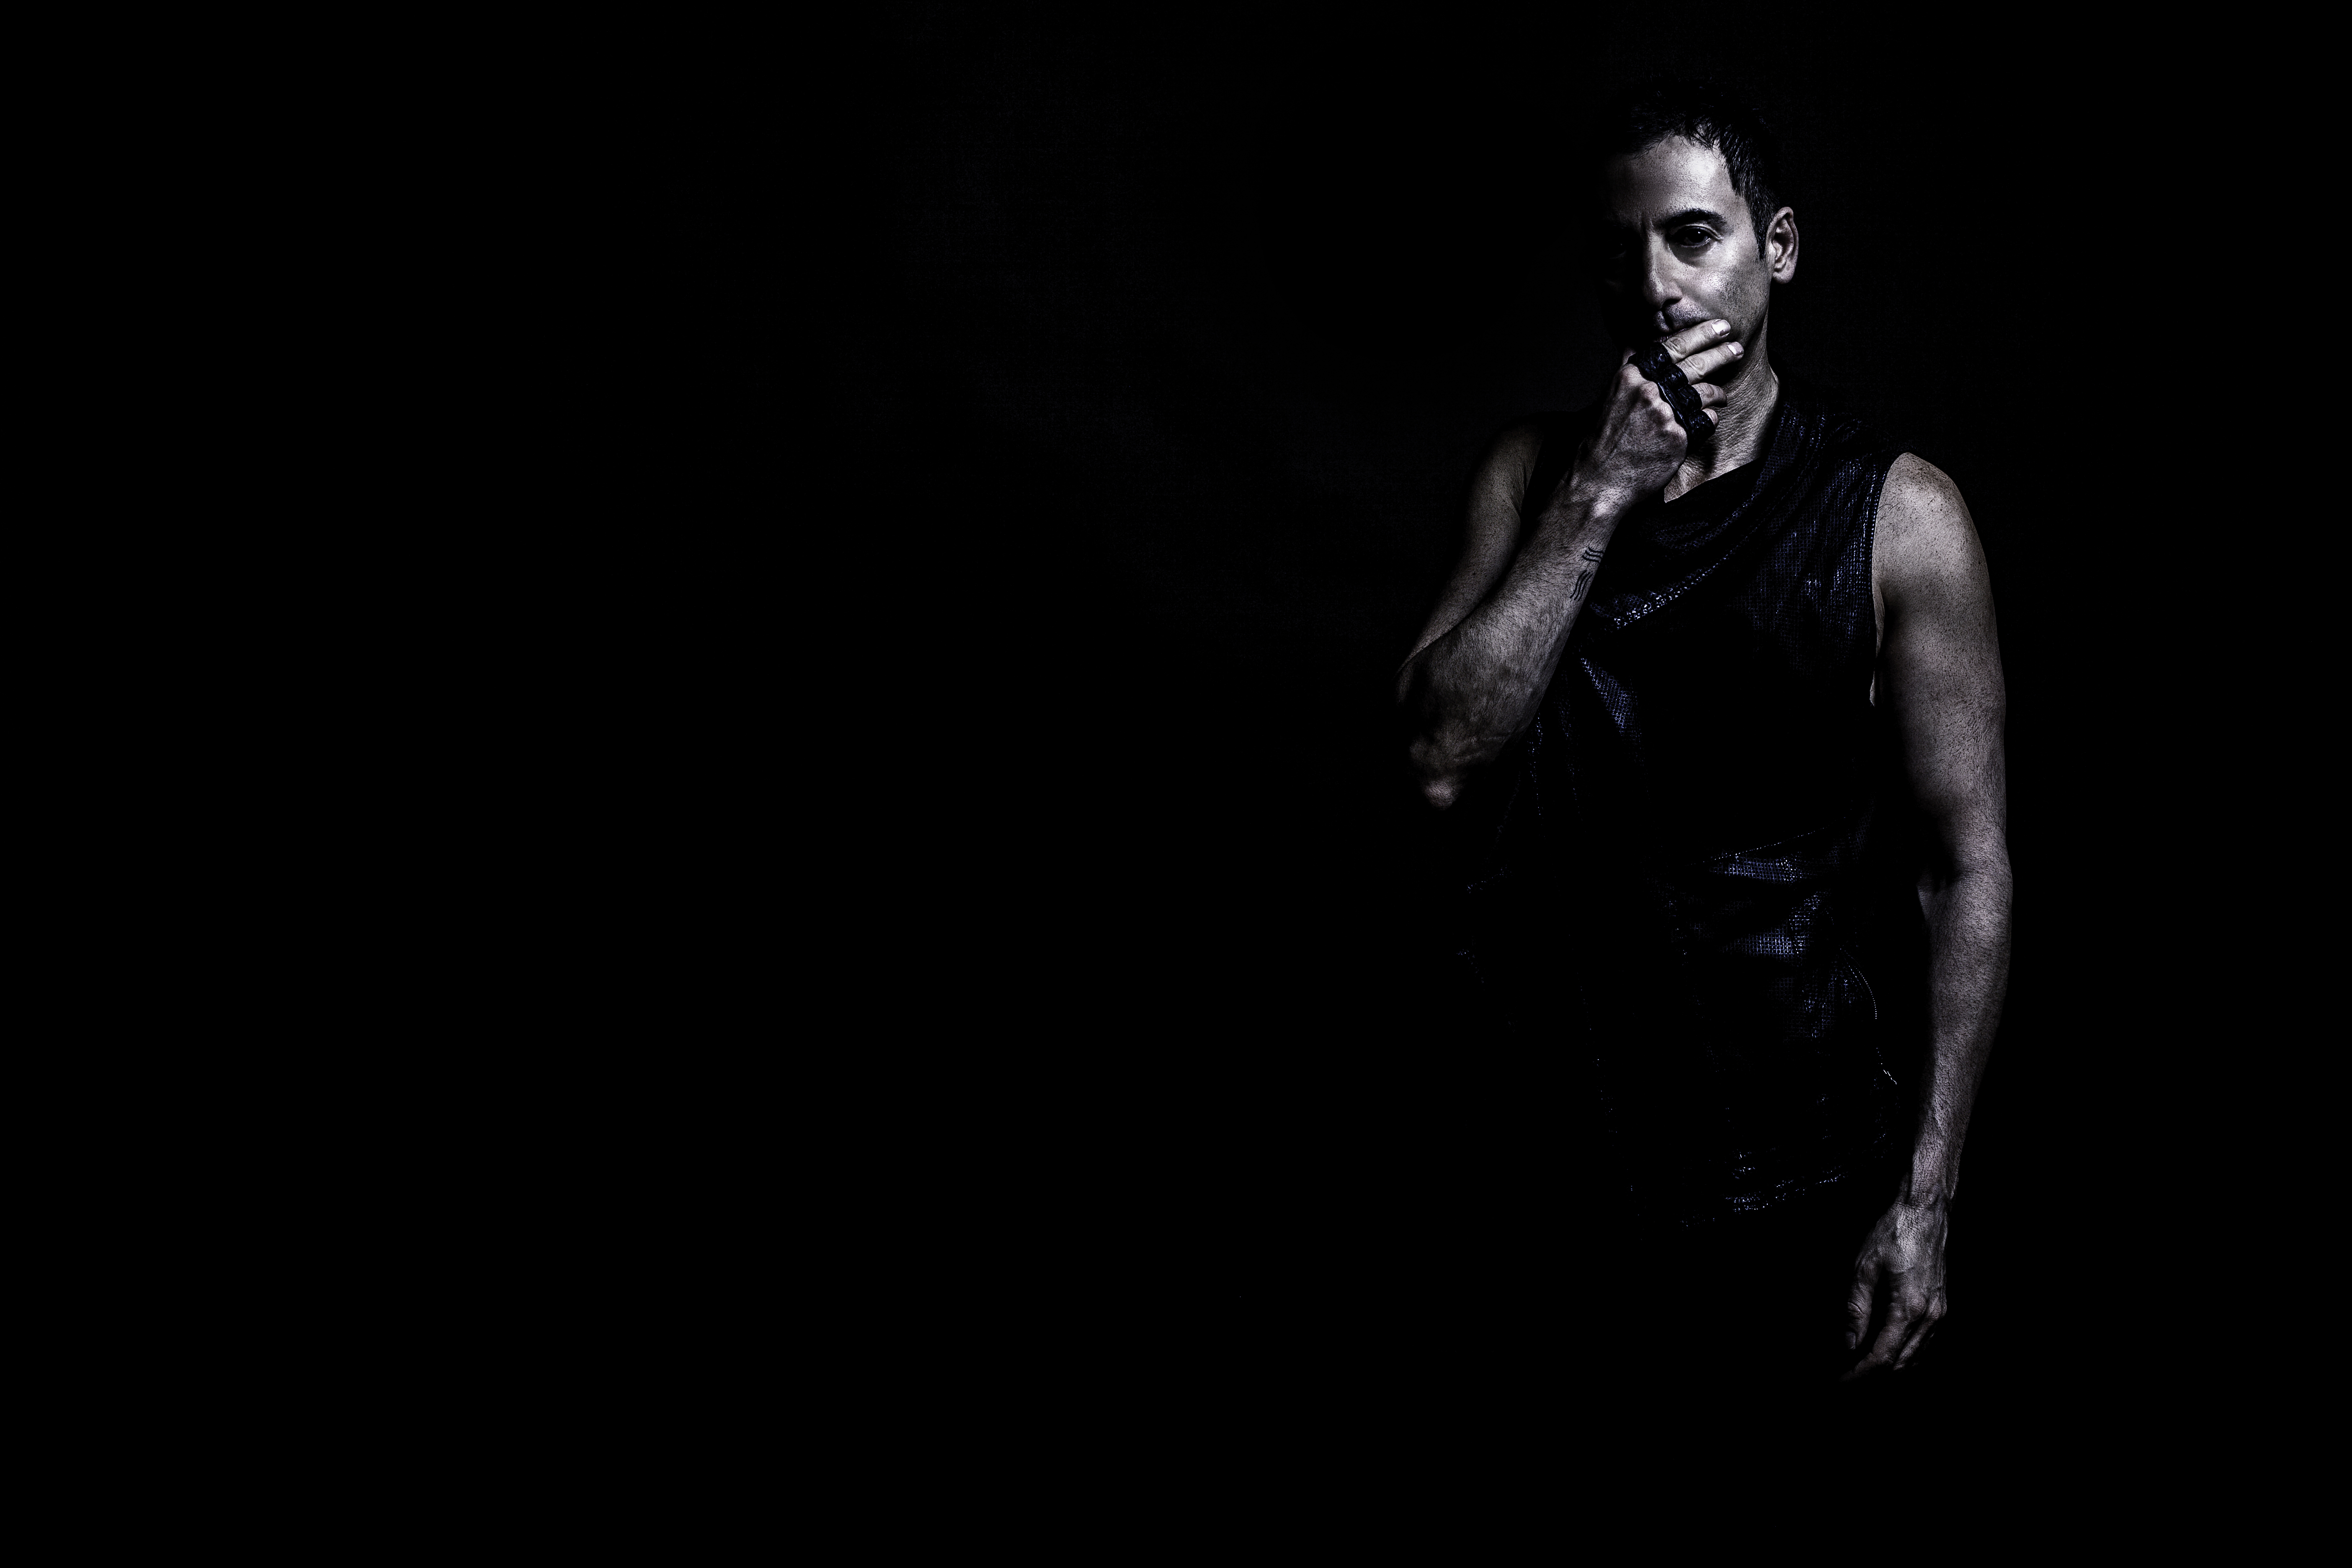 A New Documentary Profiling Dubfire’s Storied Career Has Just Released